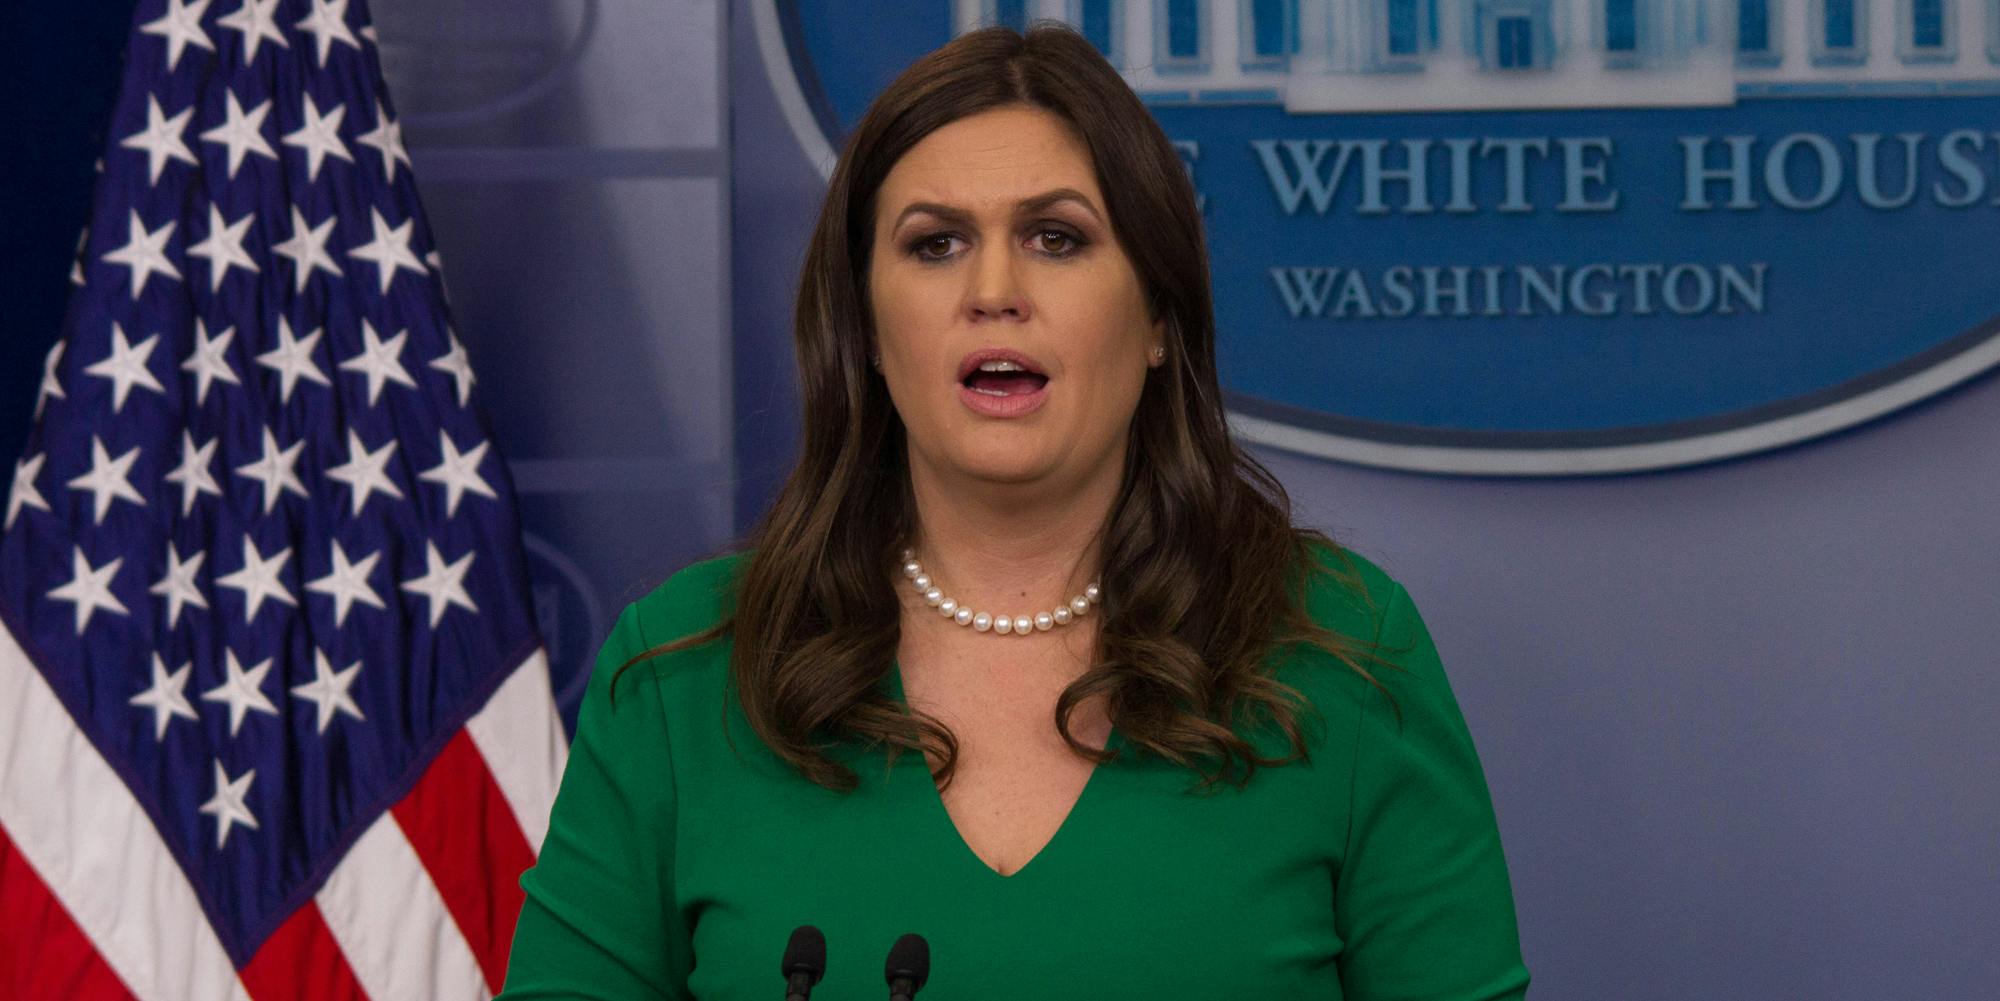 Sarah Huckabee Sanders speaking into microphones in front of blue background and American flag